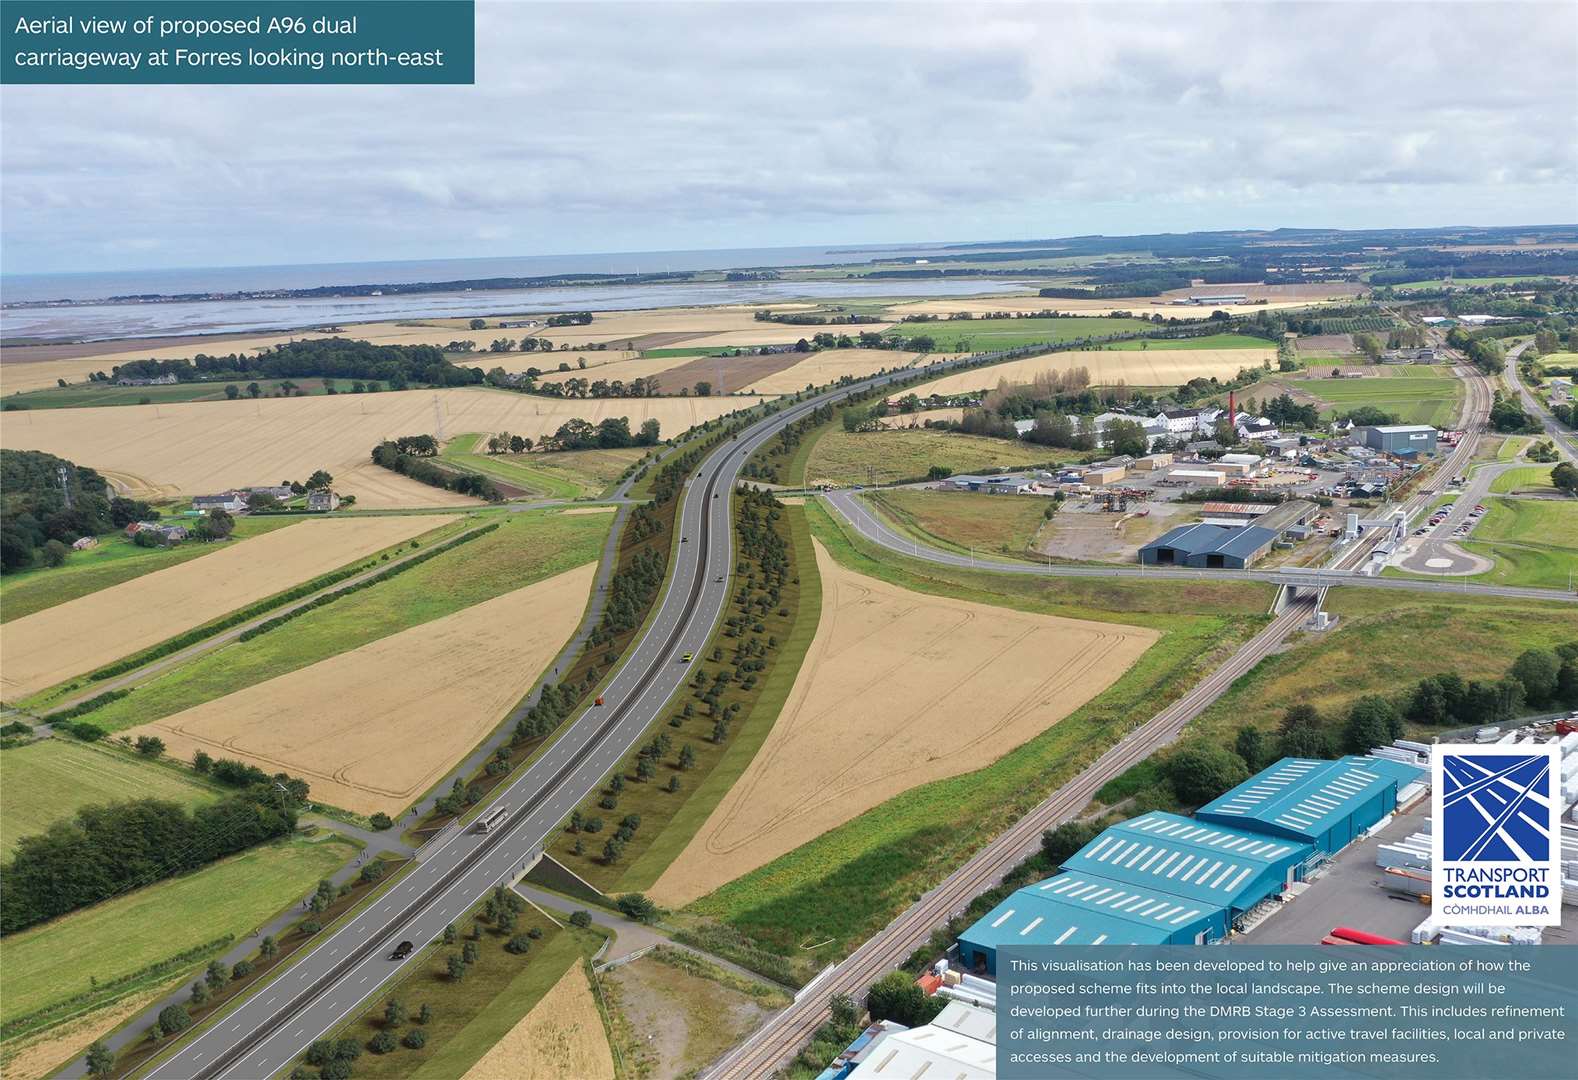 A computer generated image of the proposed A96 dual carriageway as it passes Forres.